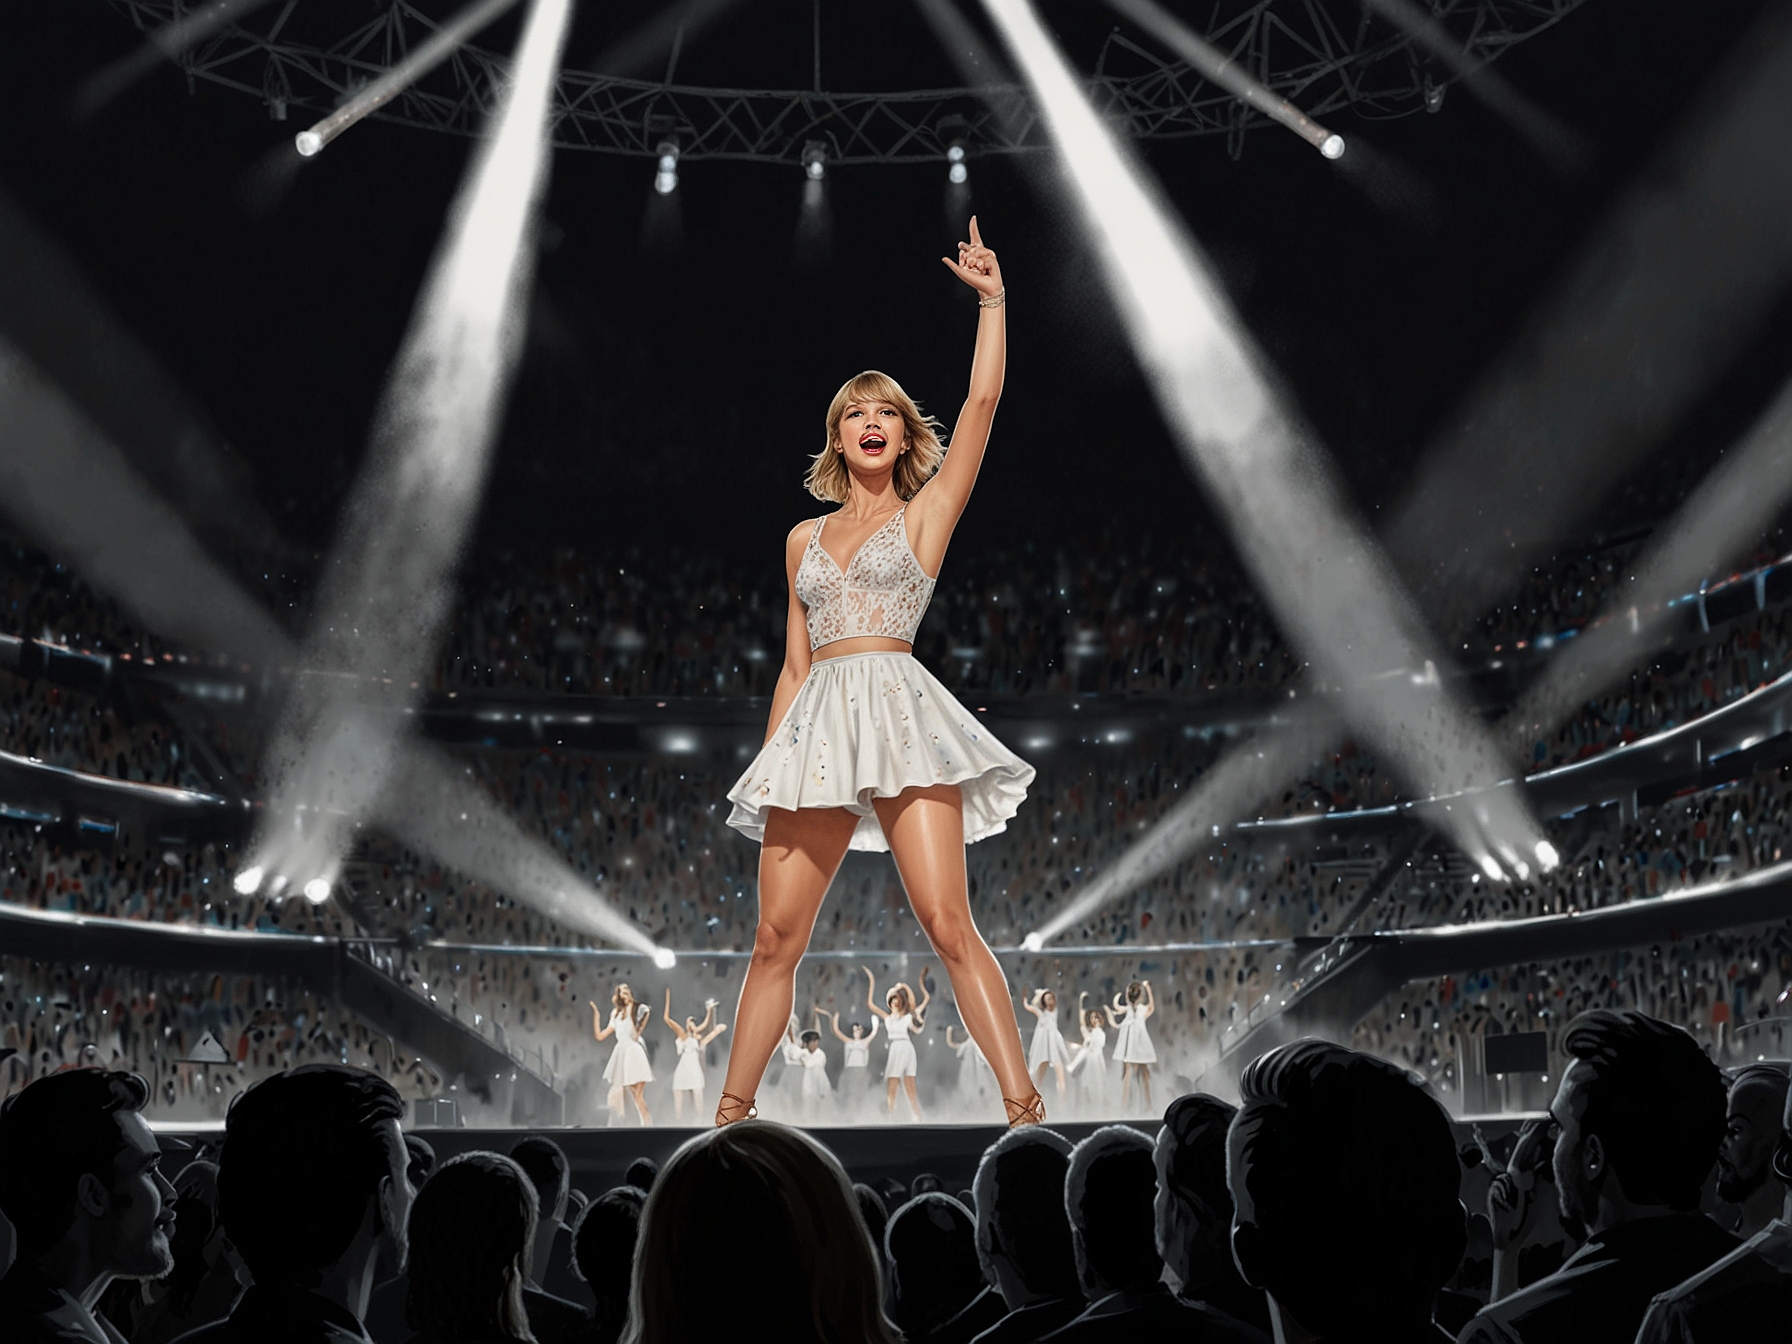 Taylor Swift performing at Wembley with richly choreographed visuals and dynamic stage presence, captivating an audience that includes the enthusiastic Kelce brothers and their fans.